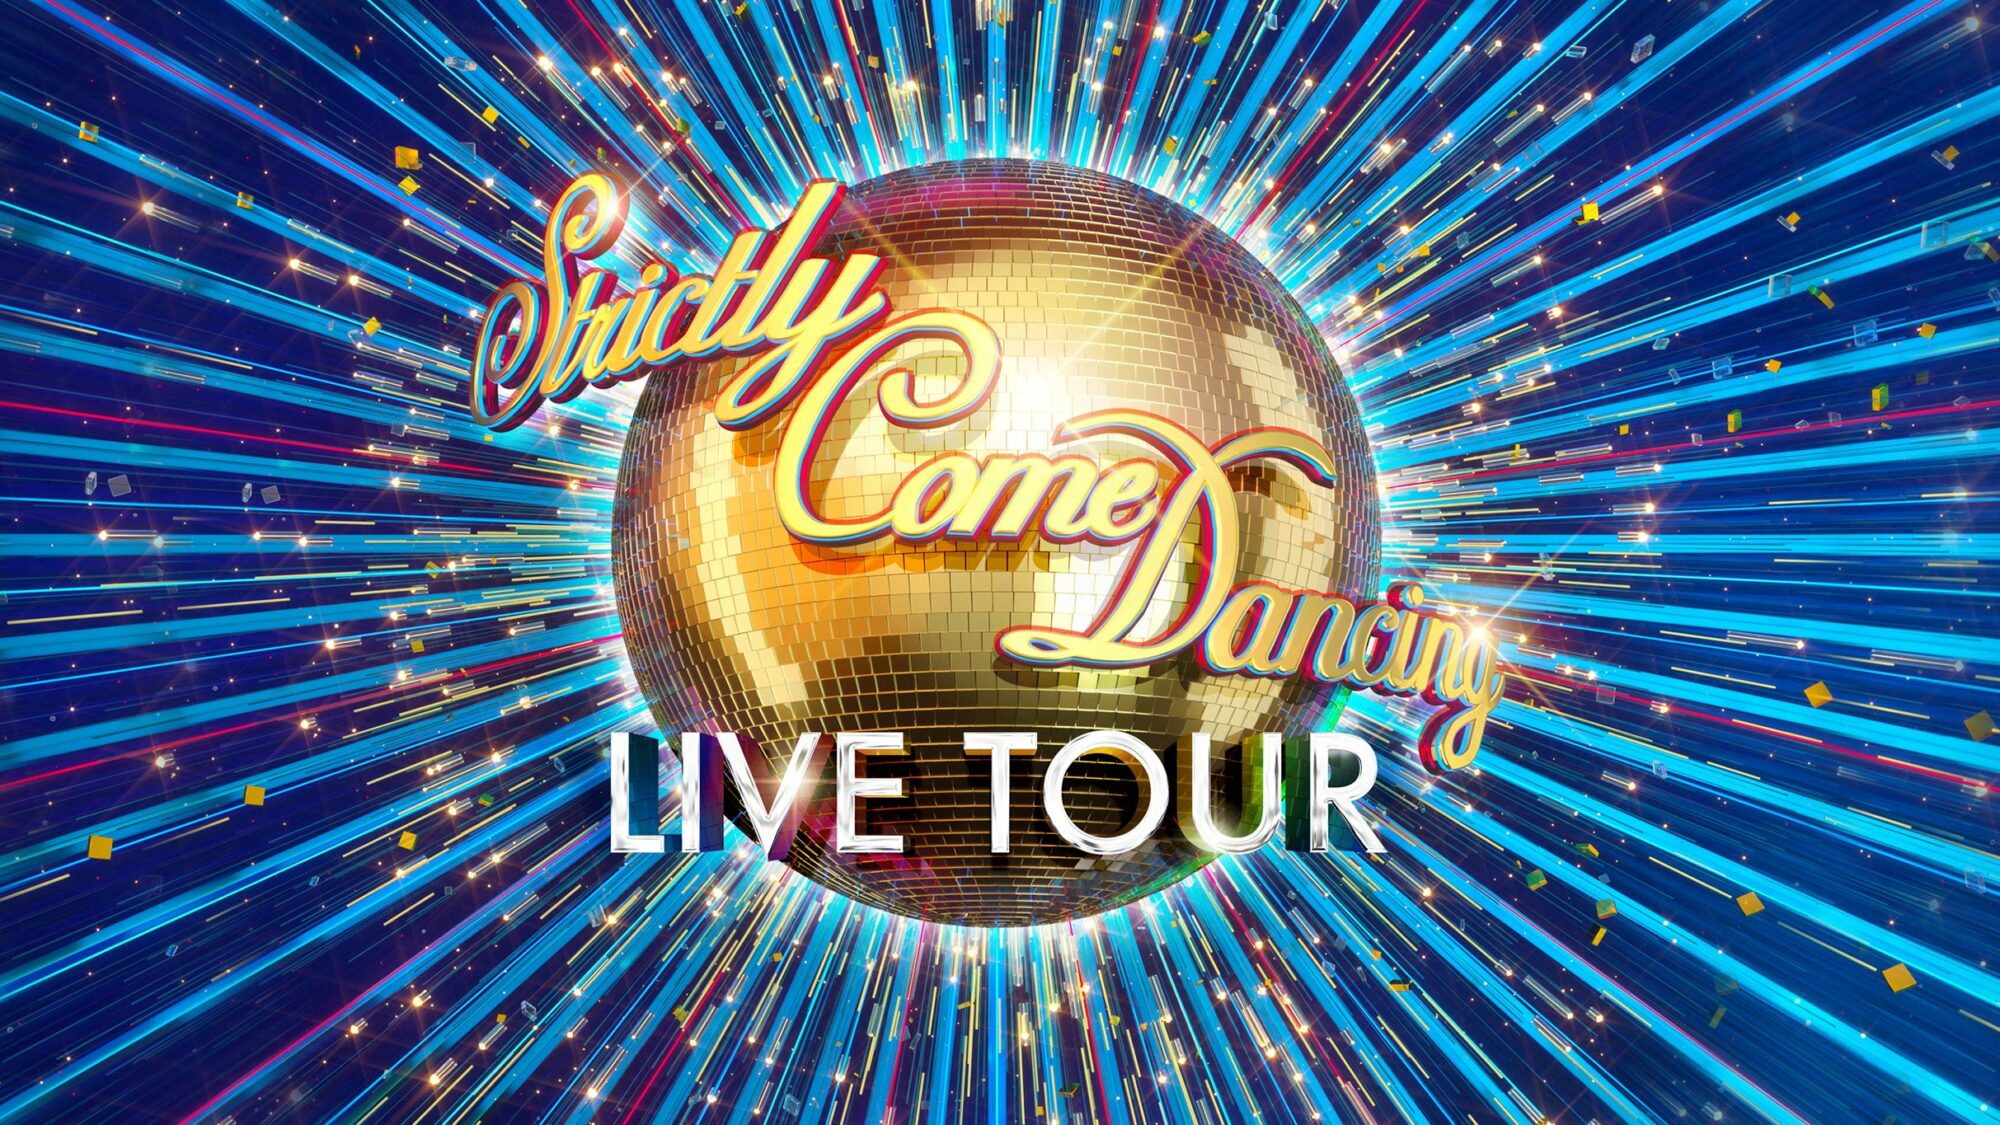 Strictly Come Dancing Live! at Utilita Arena Sheffield, Sheffield